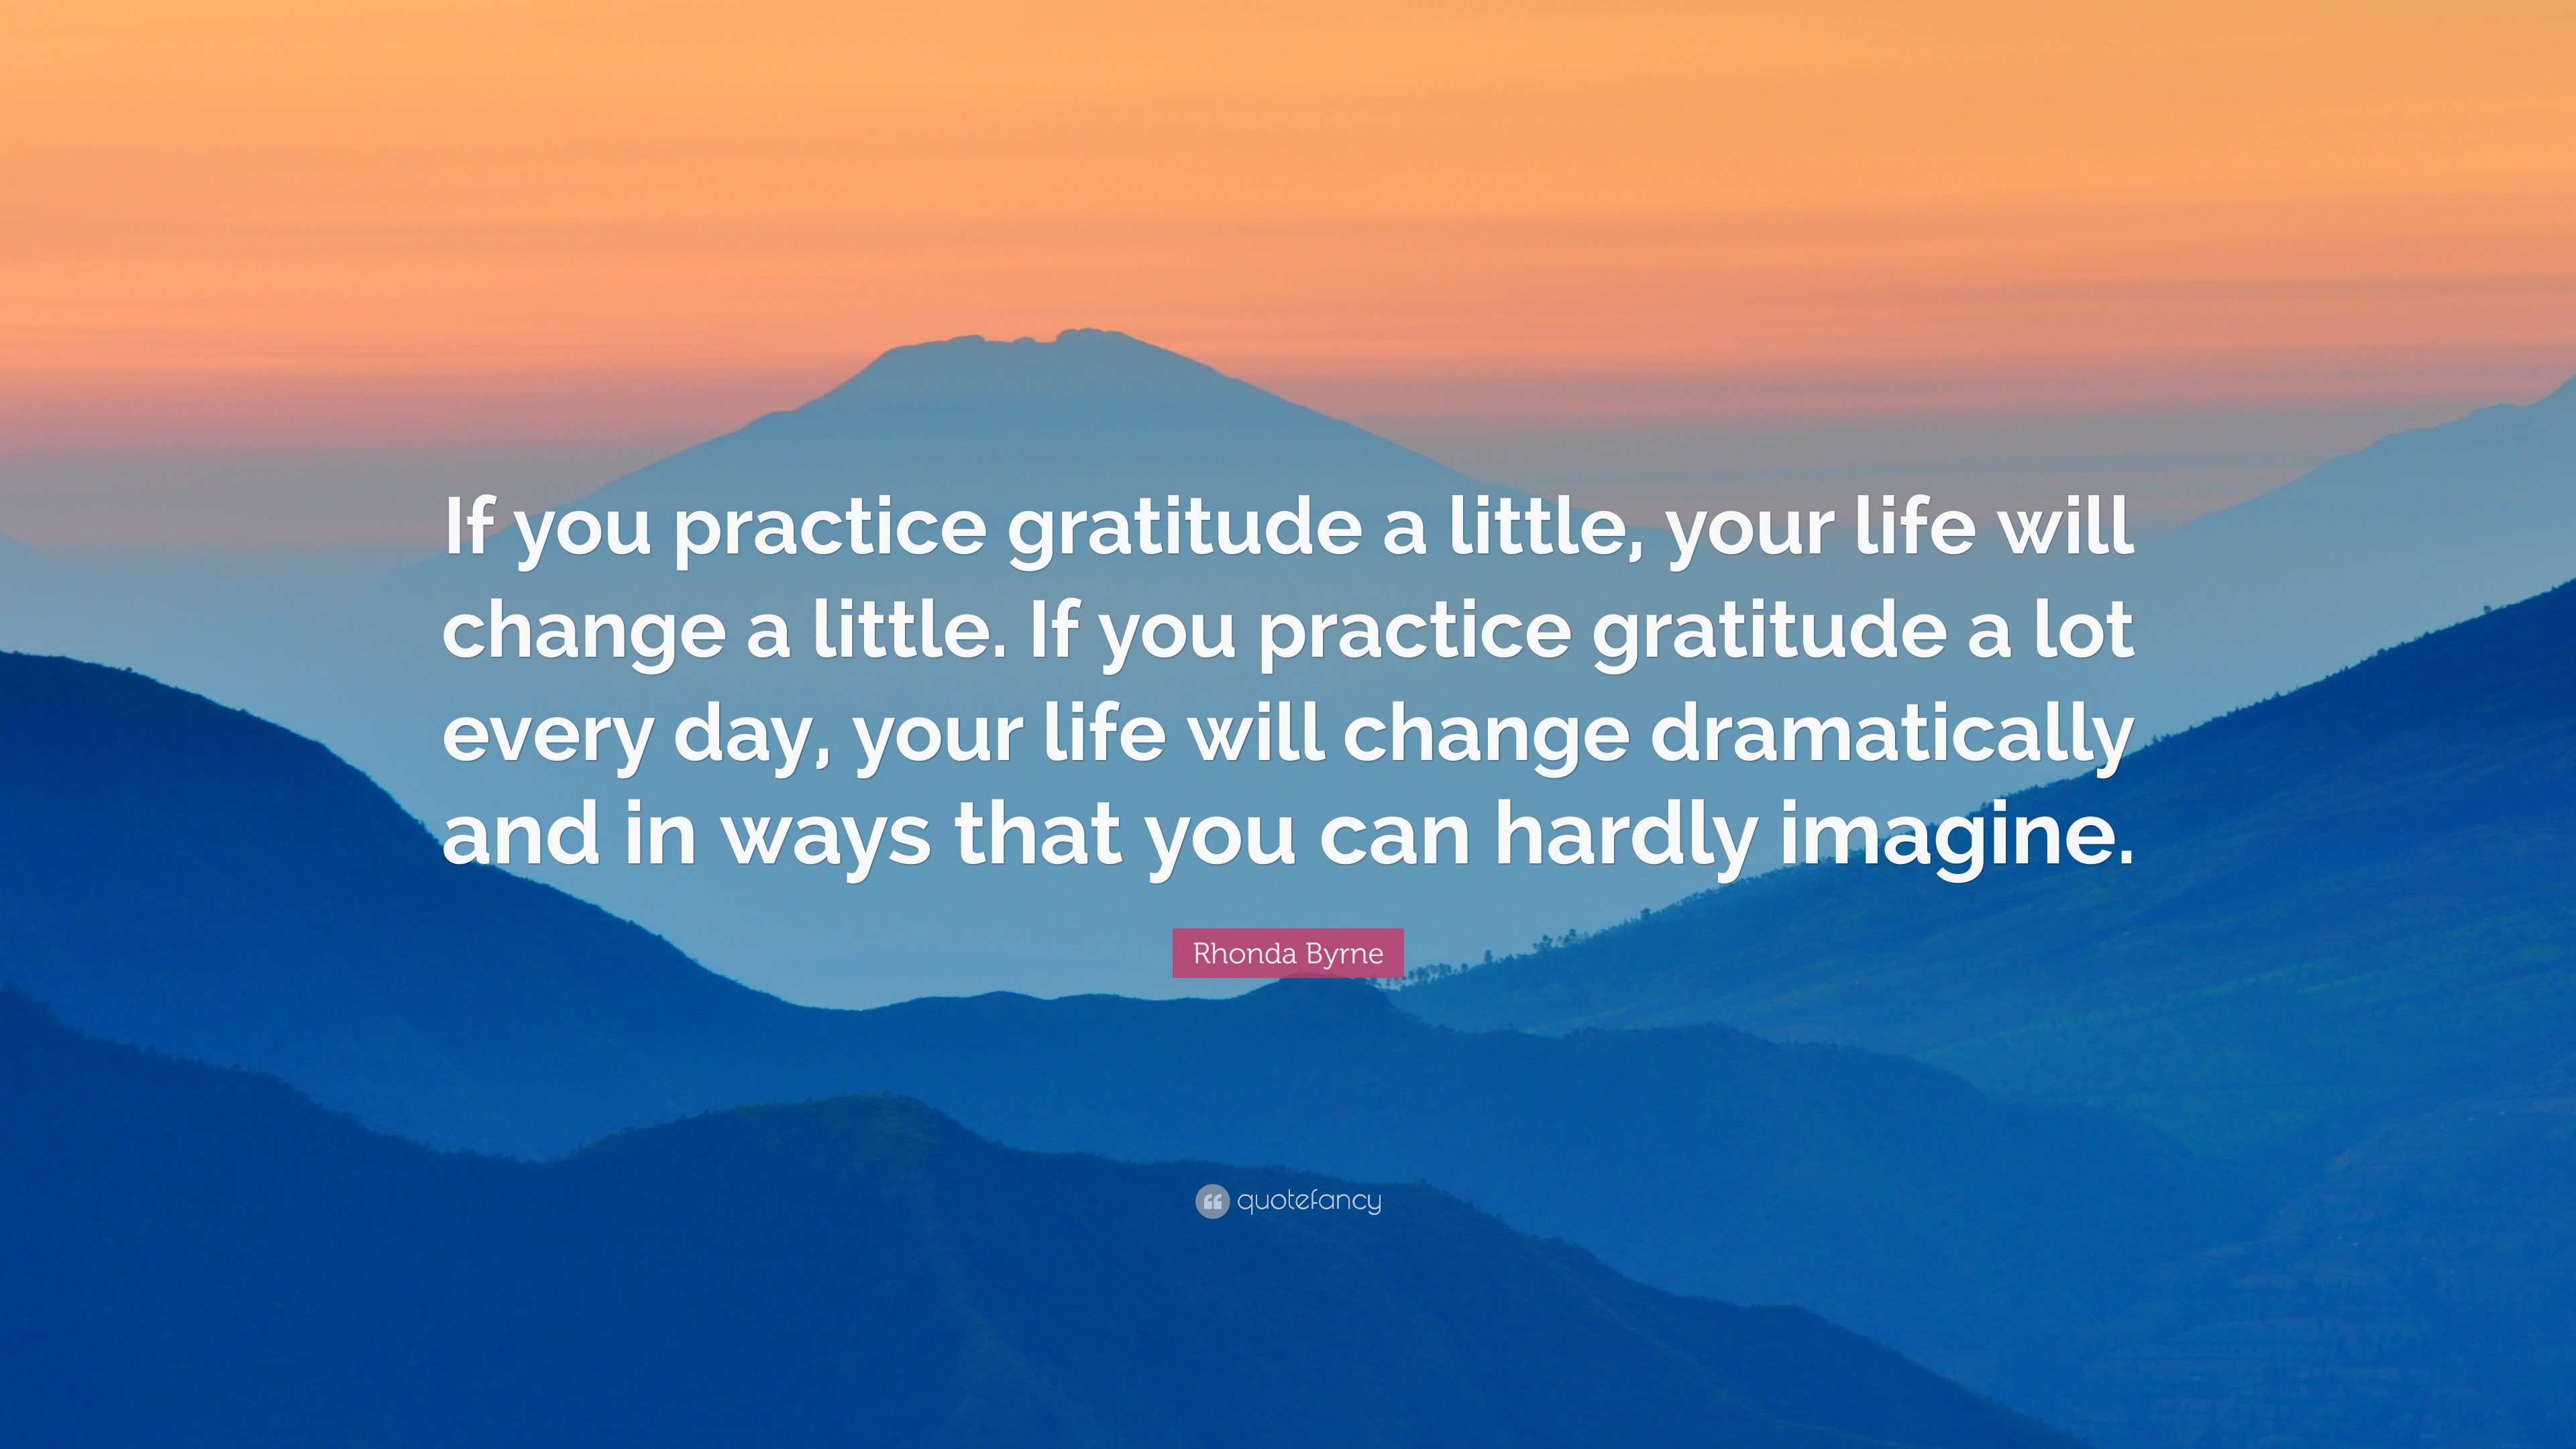 Gratitude Practiced Daily Becomes Habit, My Fisher Grad Life